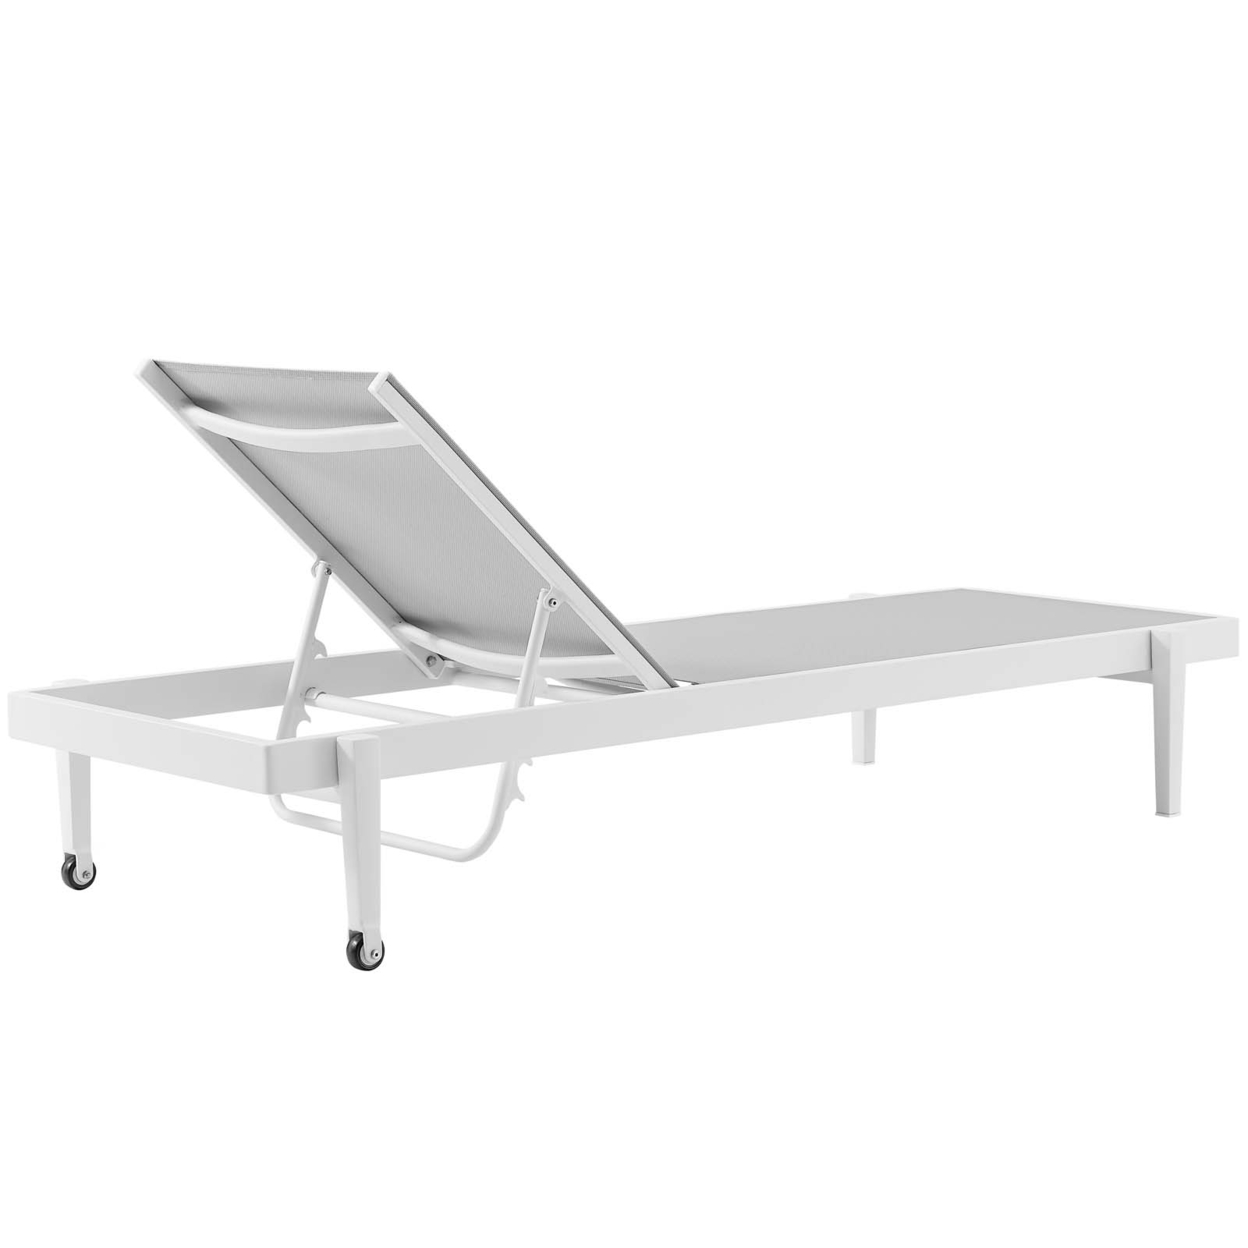 Modway Charleston Metal Aluminum Patio Chaise Lounge Chair in White/Gray - image 4 of 7